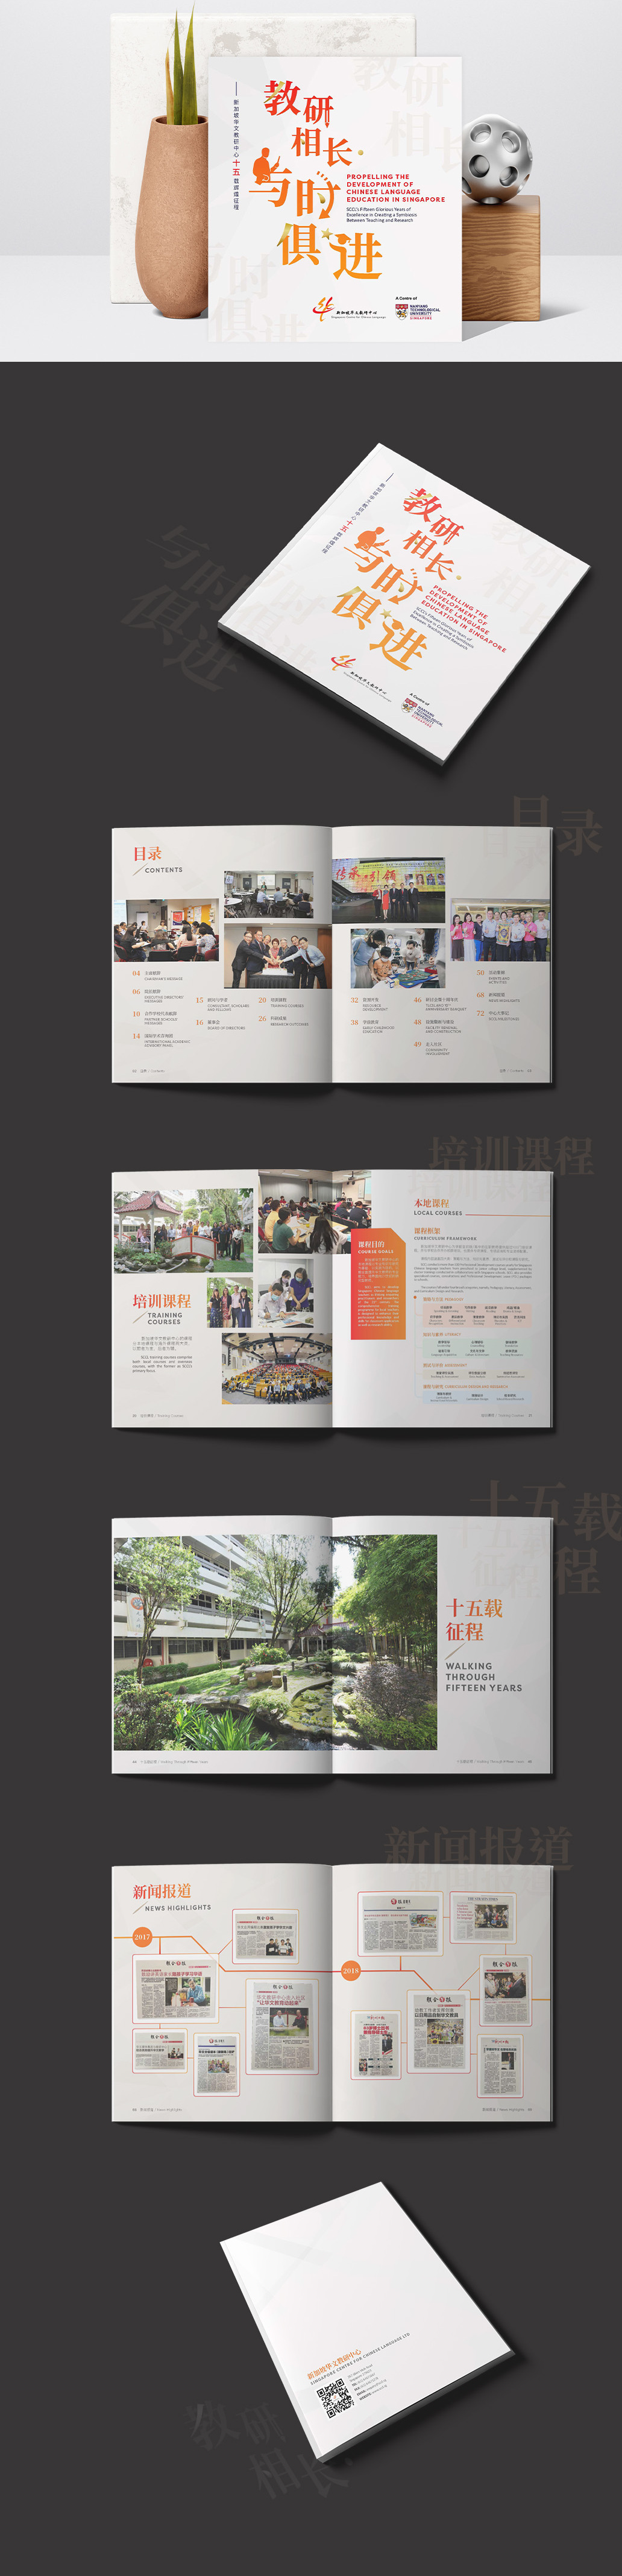 SCCL Annual Report